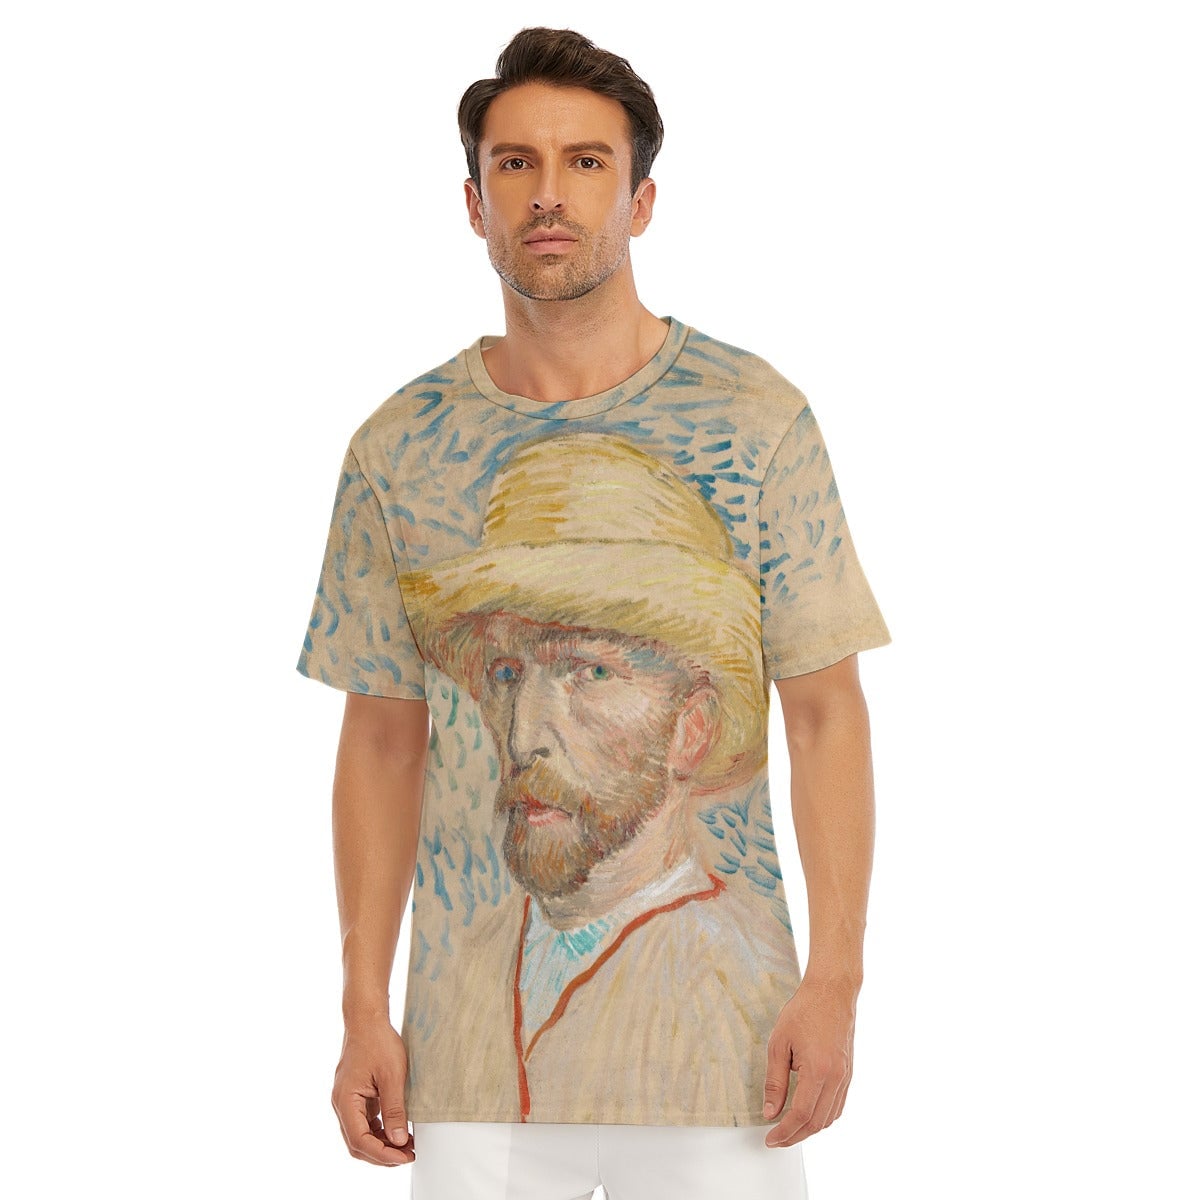 Self-Portrait with a Straw Hat by Vincent van Gogh T-Shirt